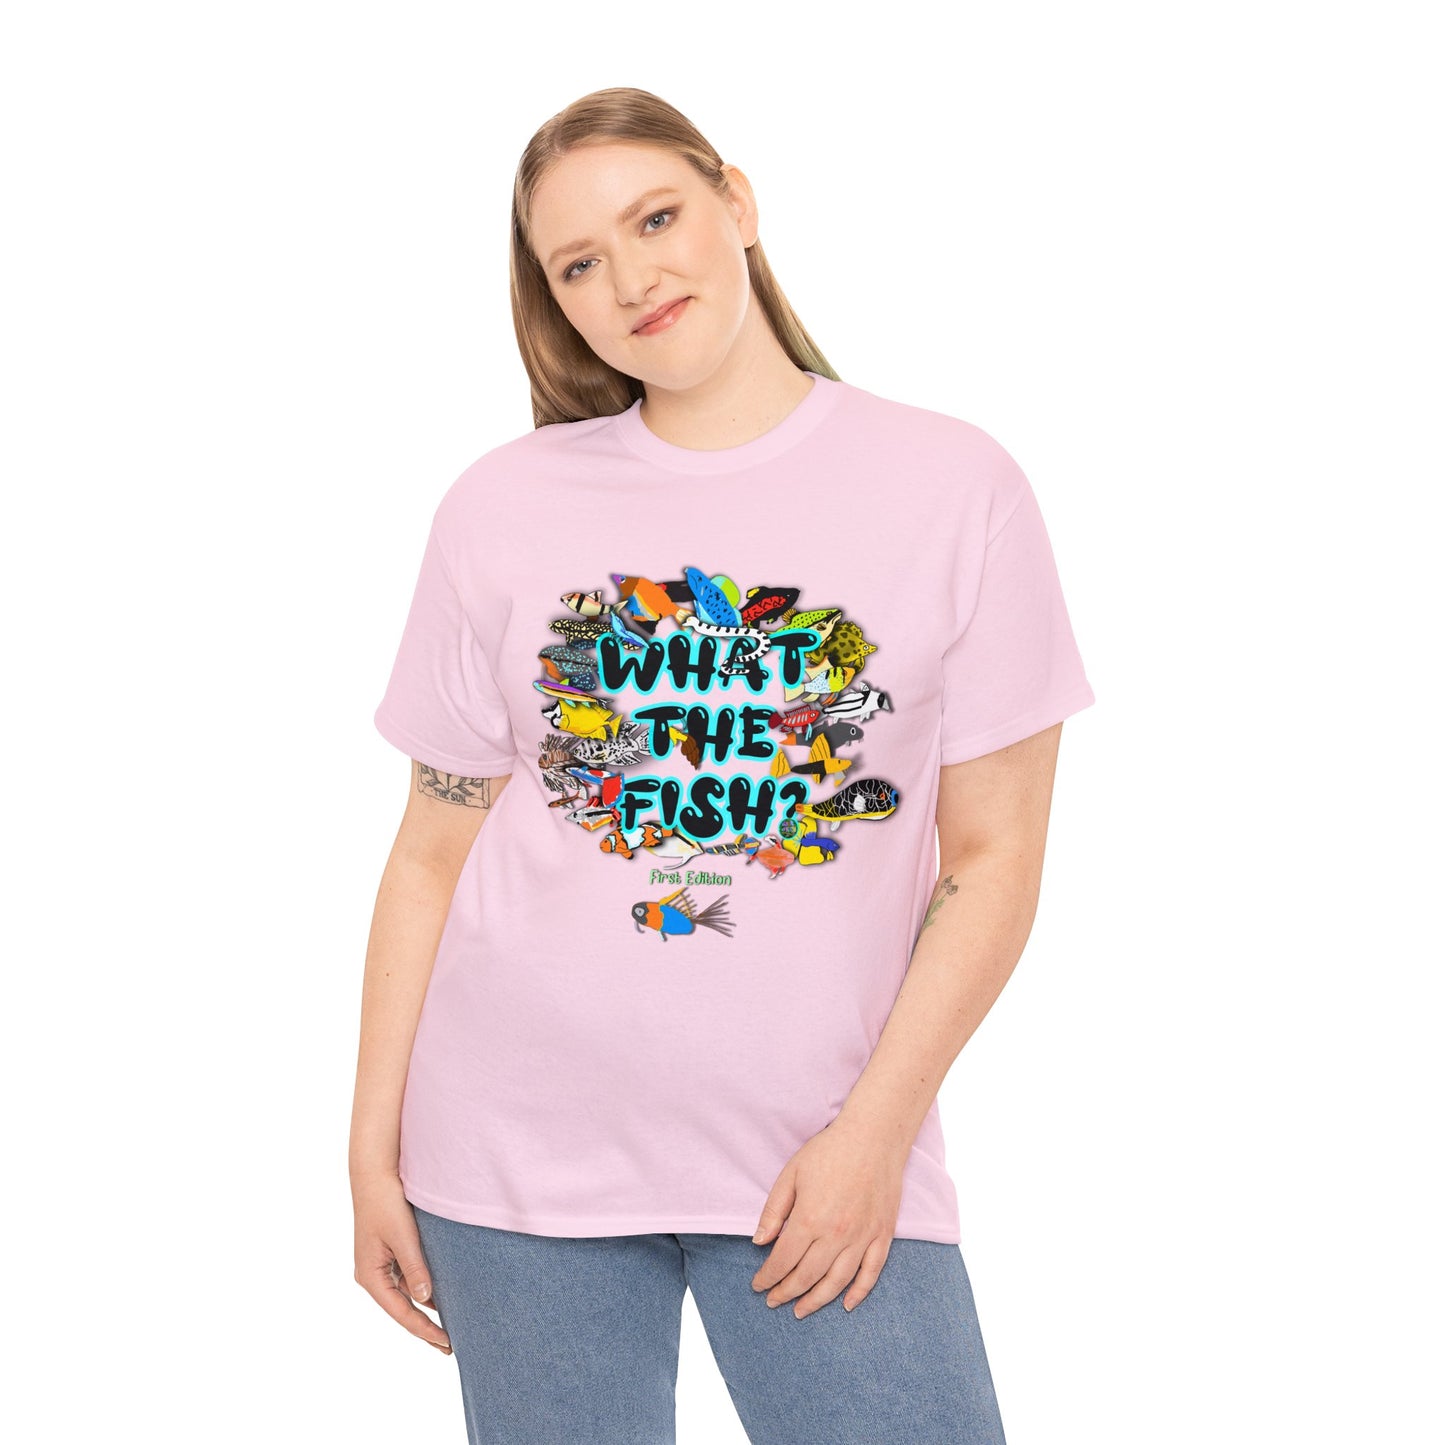 T-Shirt - ORIGINAL What the Fish First Edition